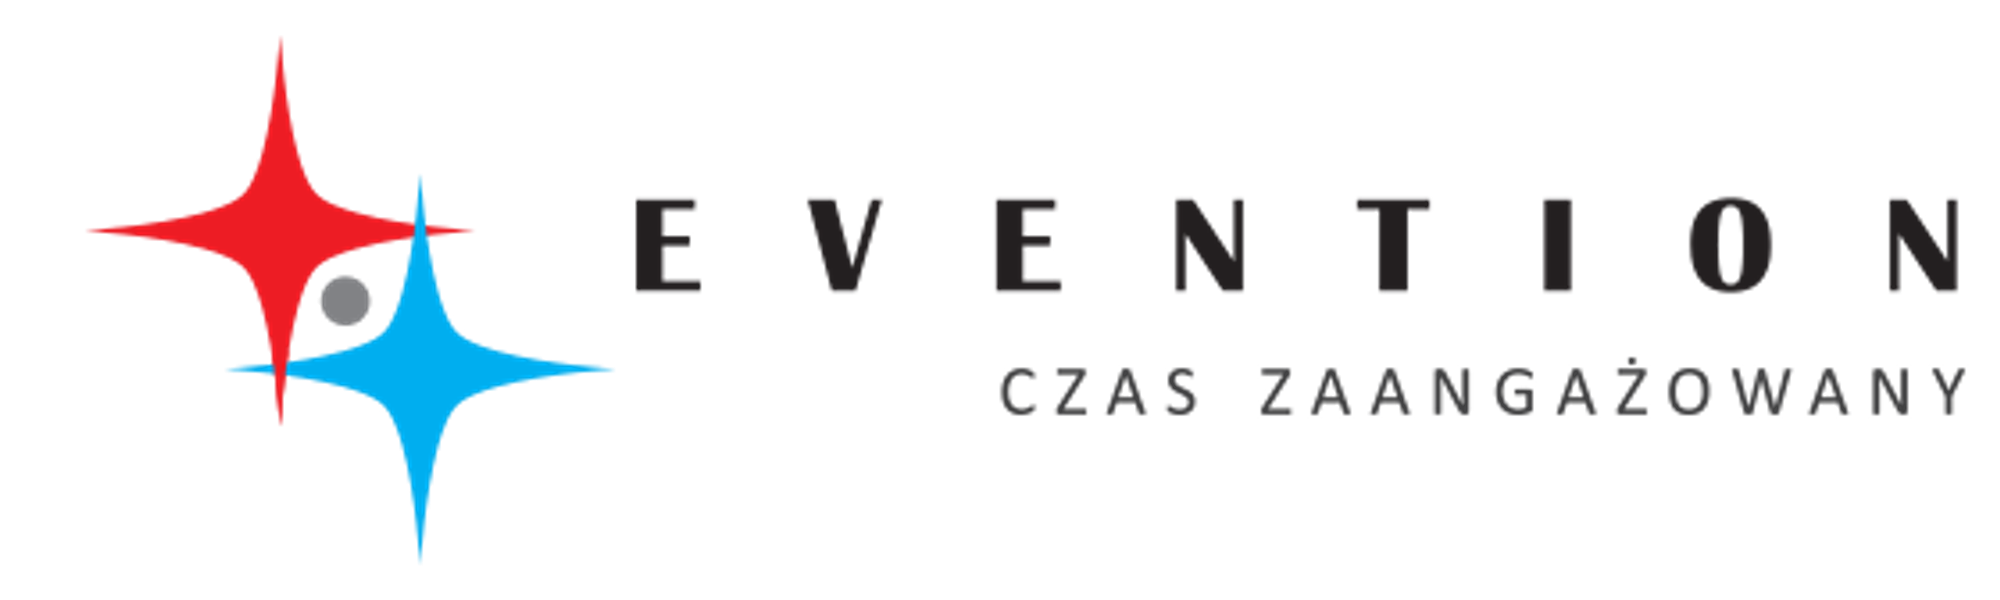 Evention Logo.png